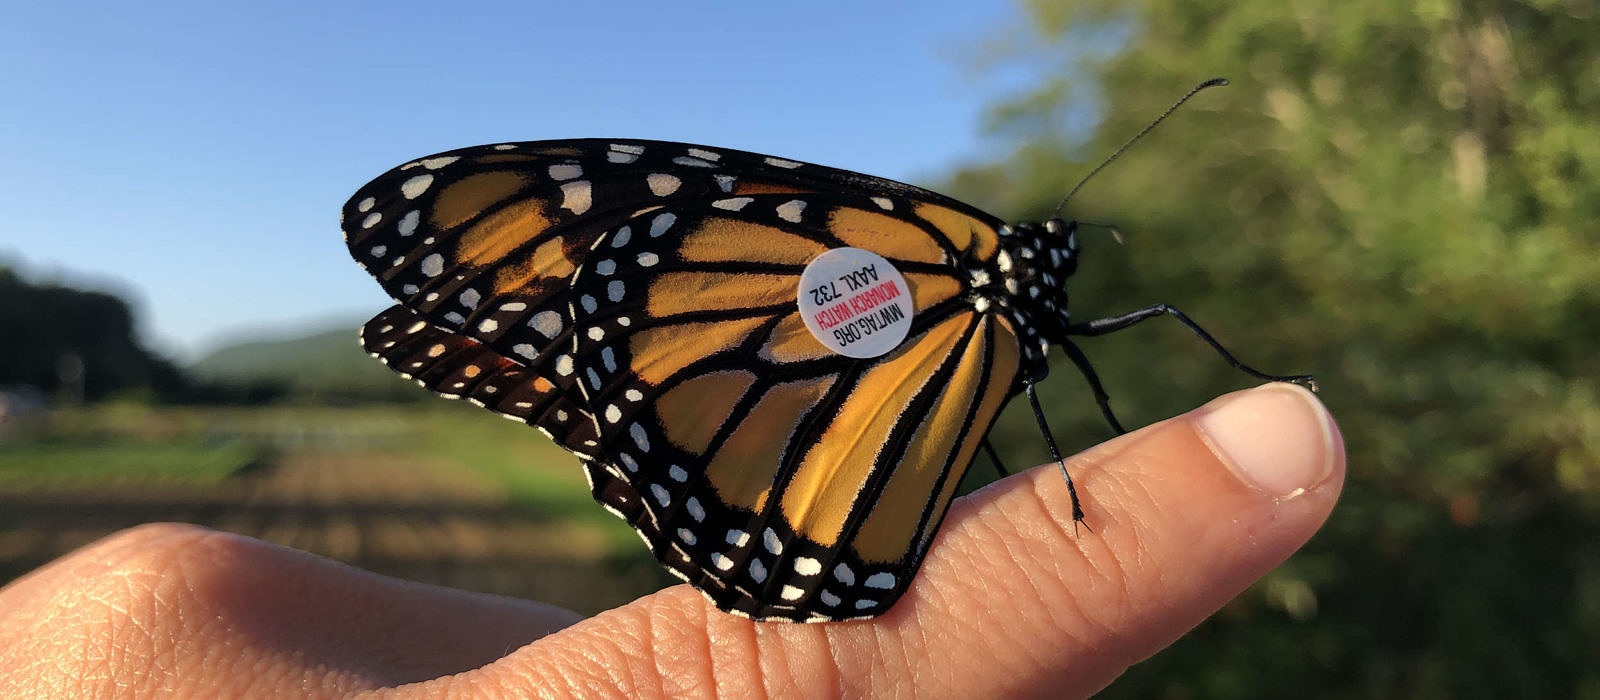 A monarch butterfly with a circular tag on its wing perches on a person's finger. (photo © Brett Amy Thelen)